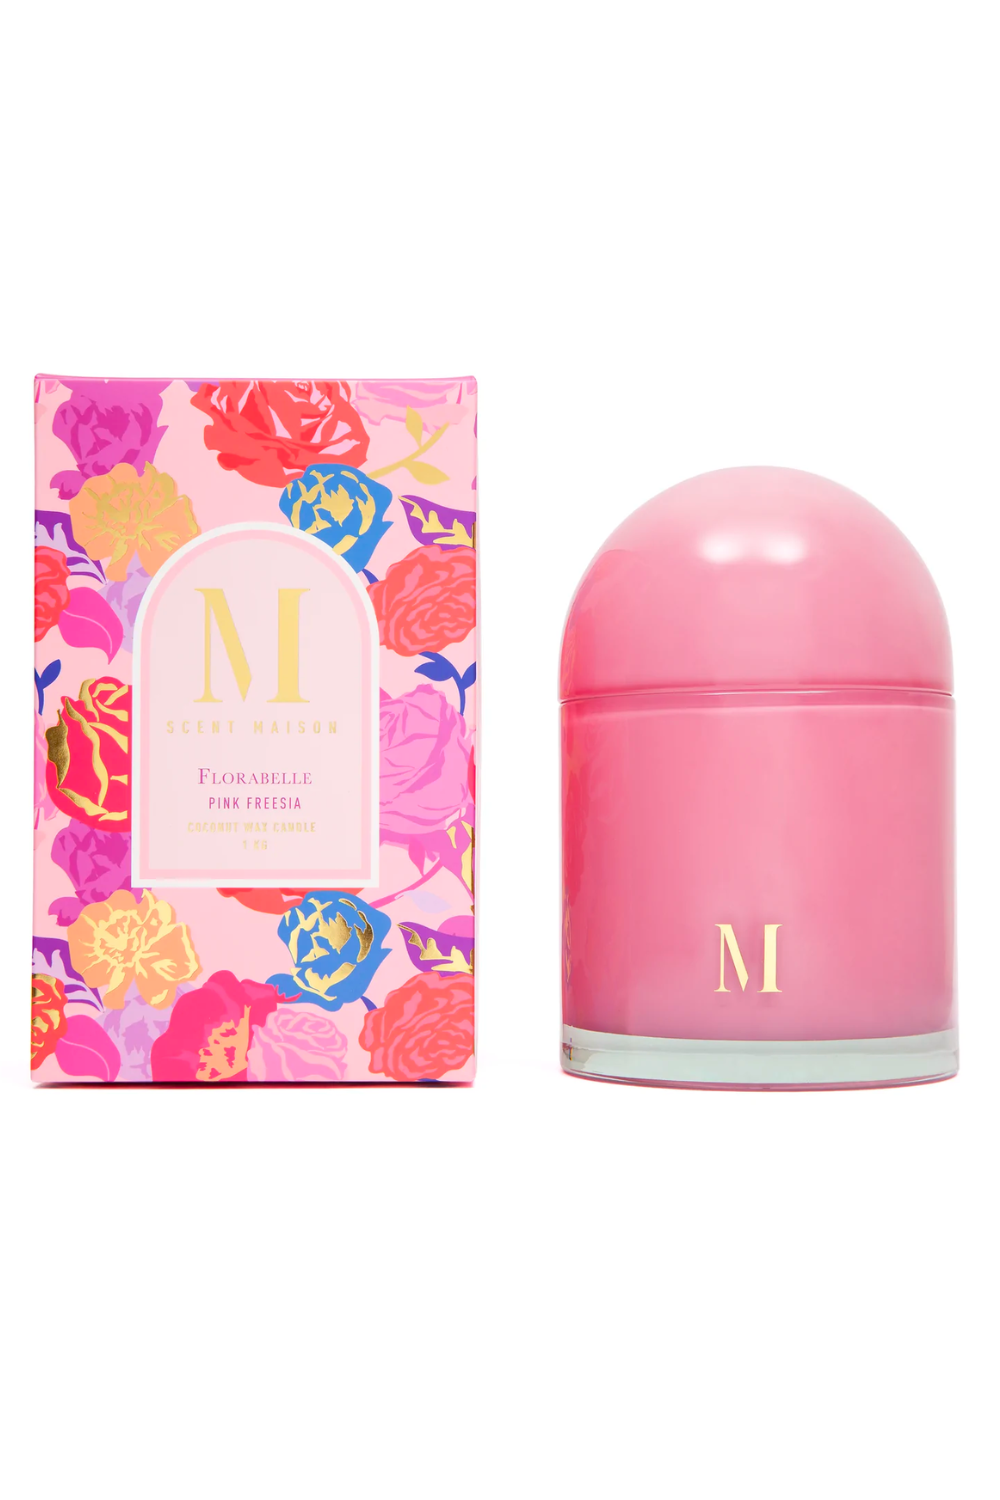 LARGE SCENT MAISON FLORABELLE - PINK FREESIA 1000G CANDLE